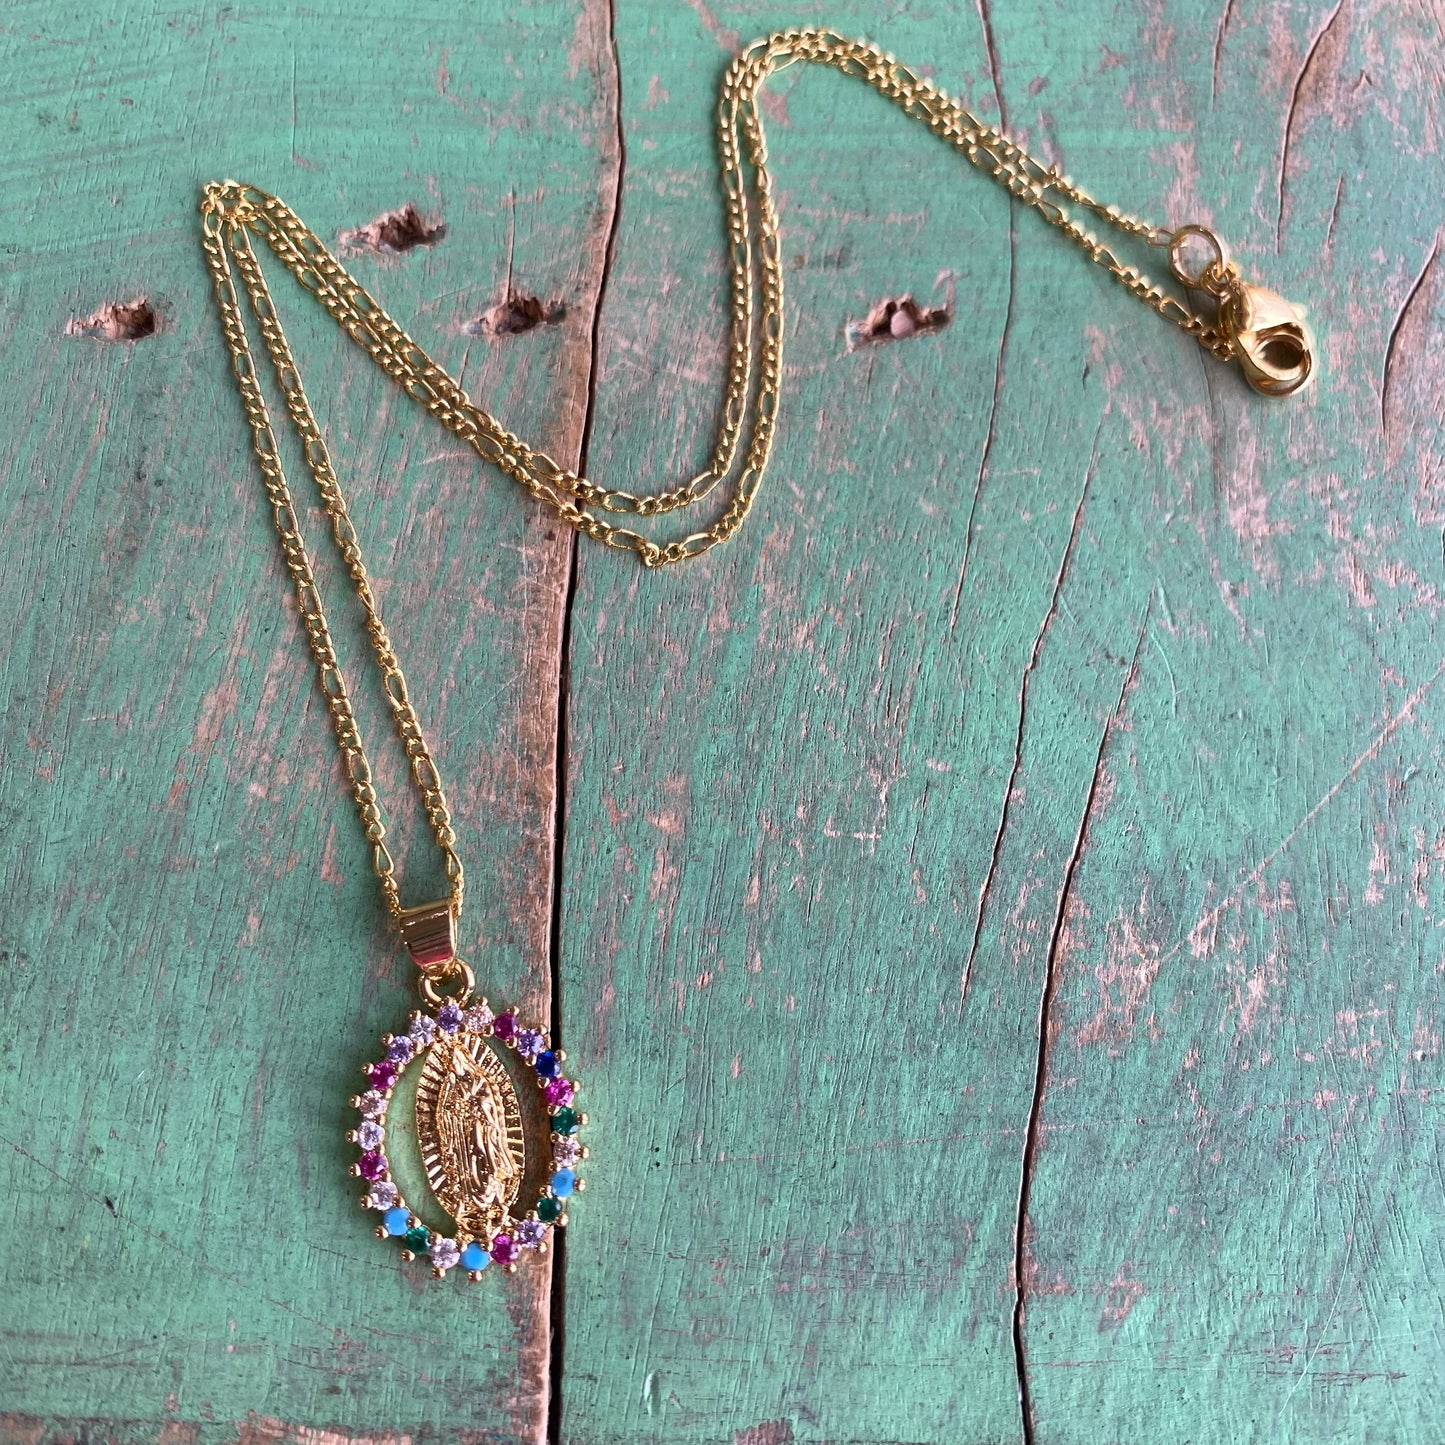 Spring Blessings OLG Necklace